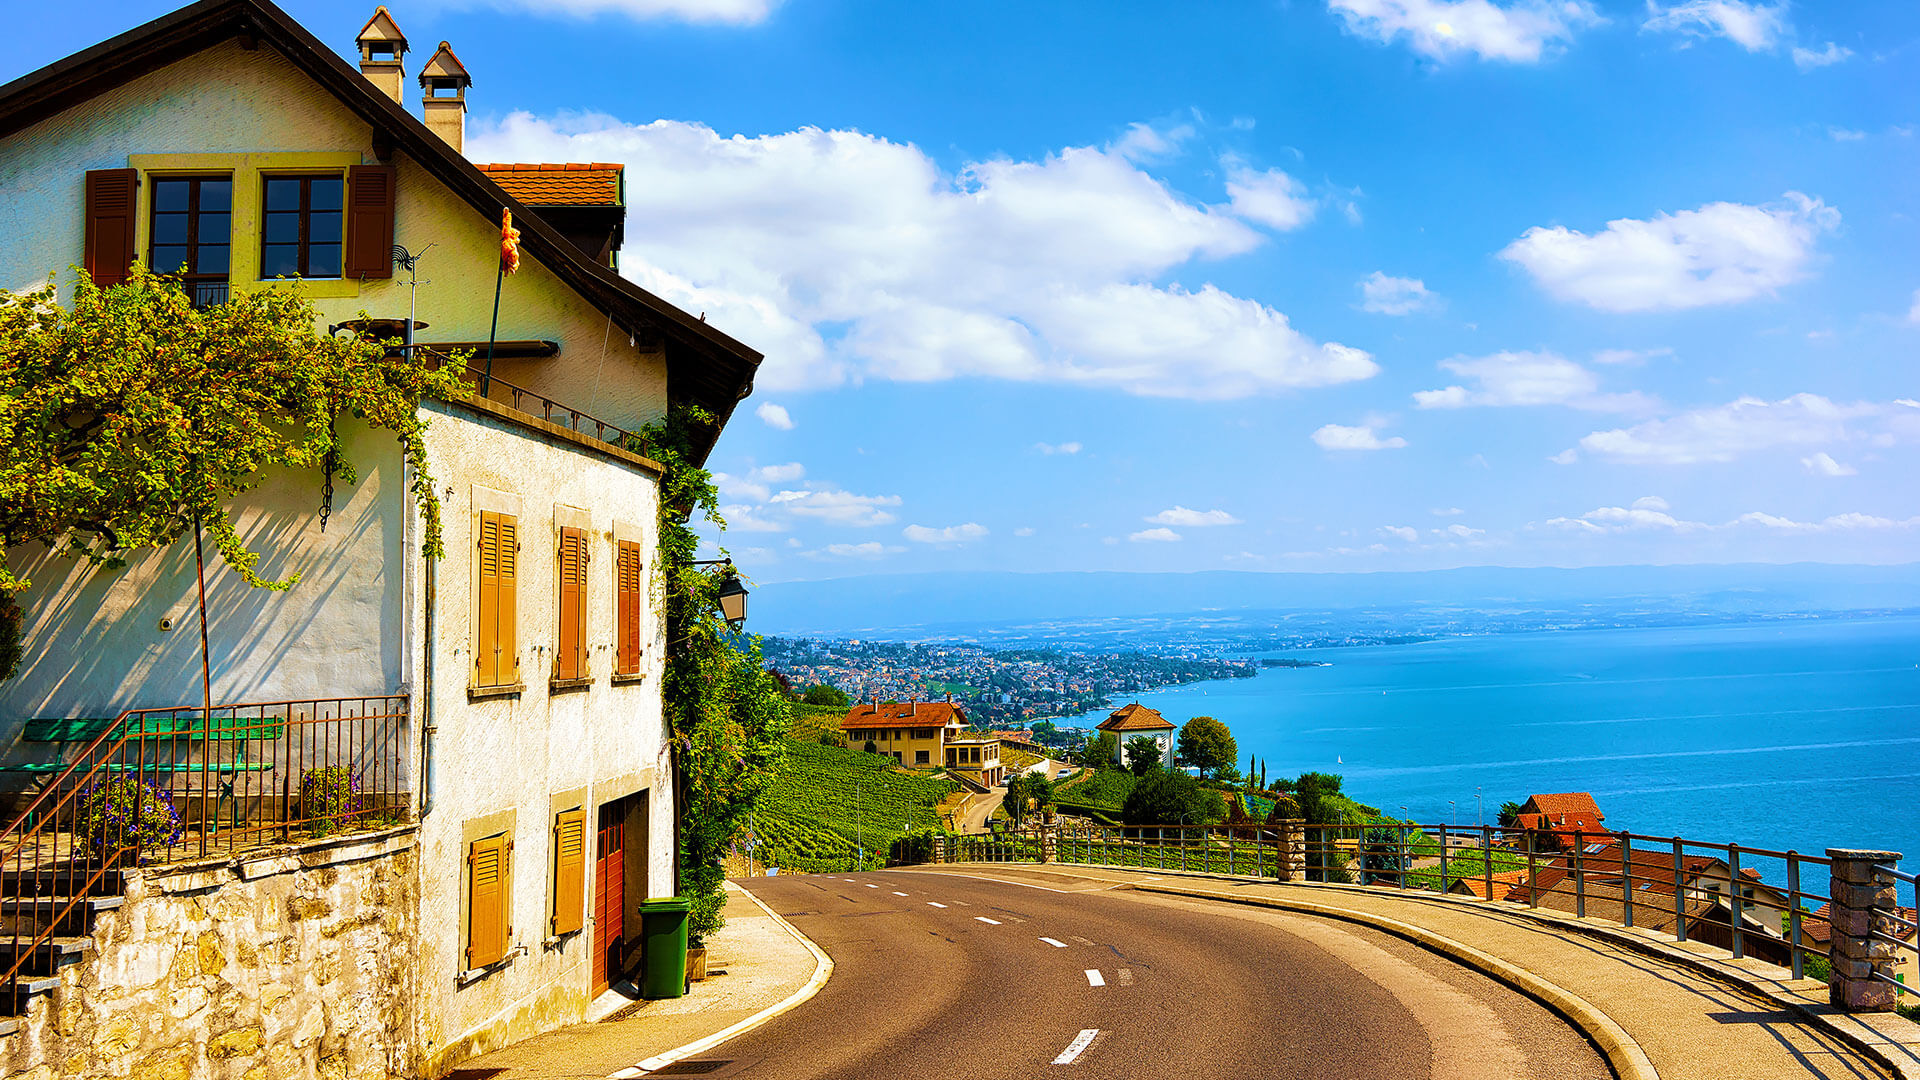 All-the-way-to-Lavaux-vineyards-Switzerland